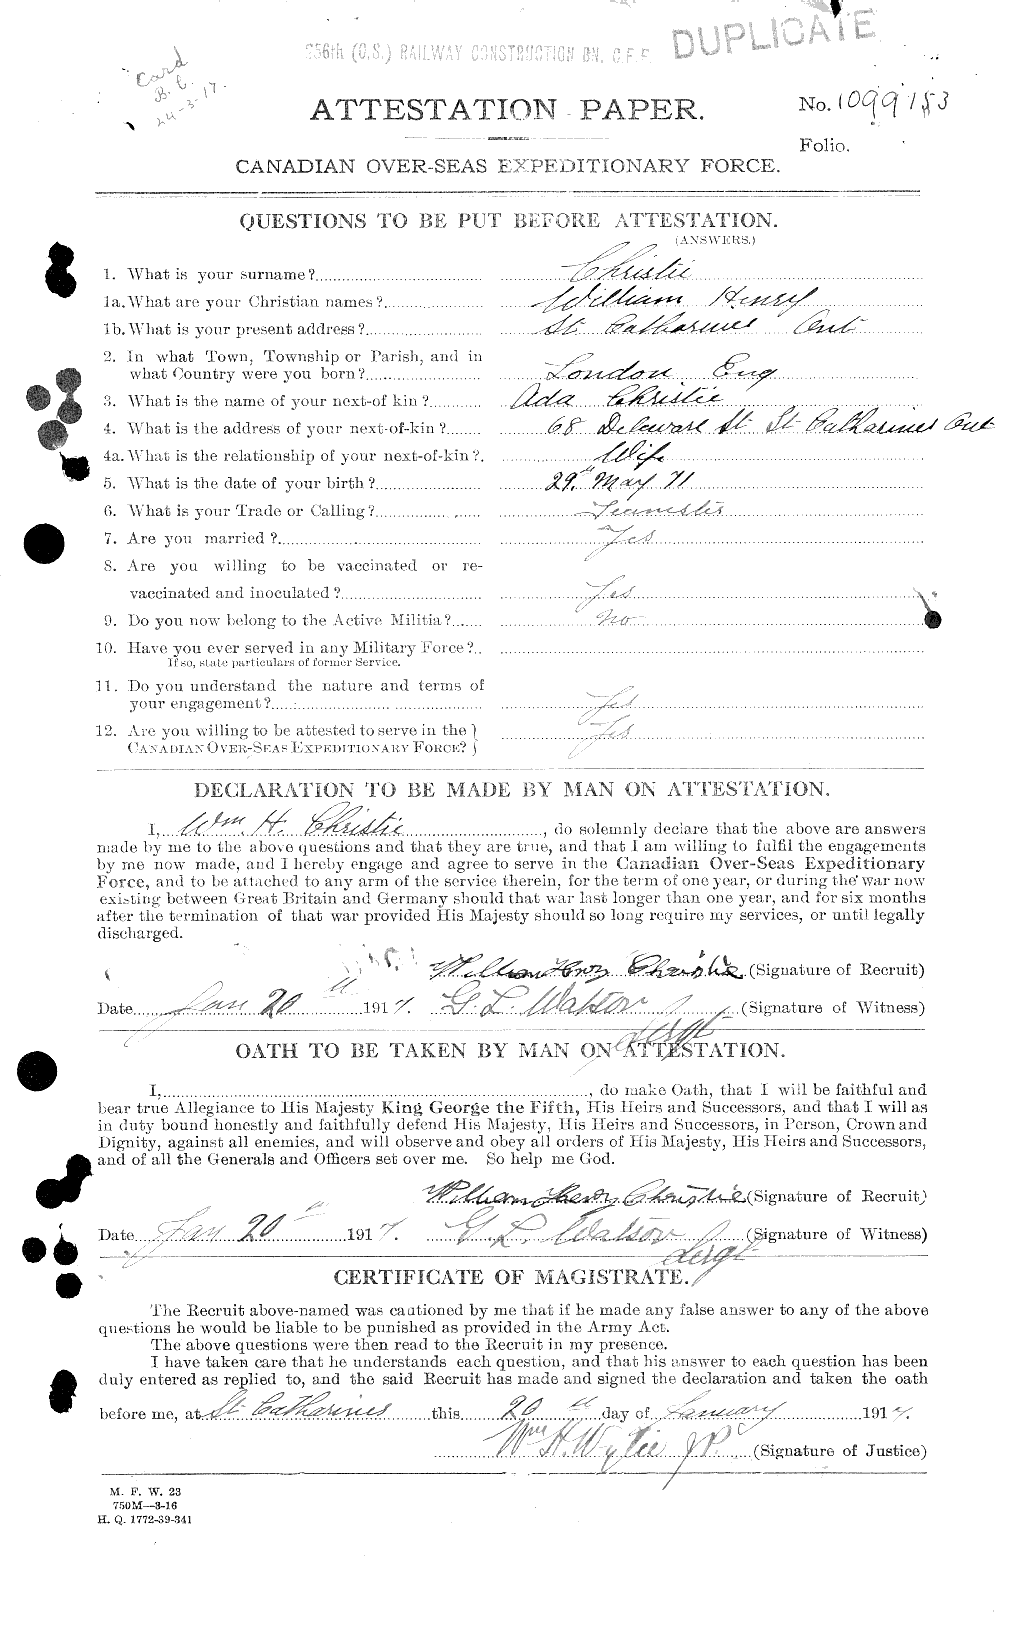 Personnel Records of the First World War - CEF 022099a